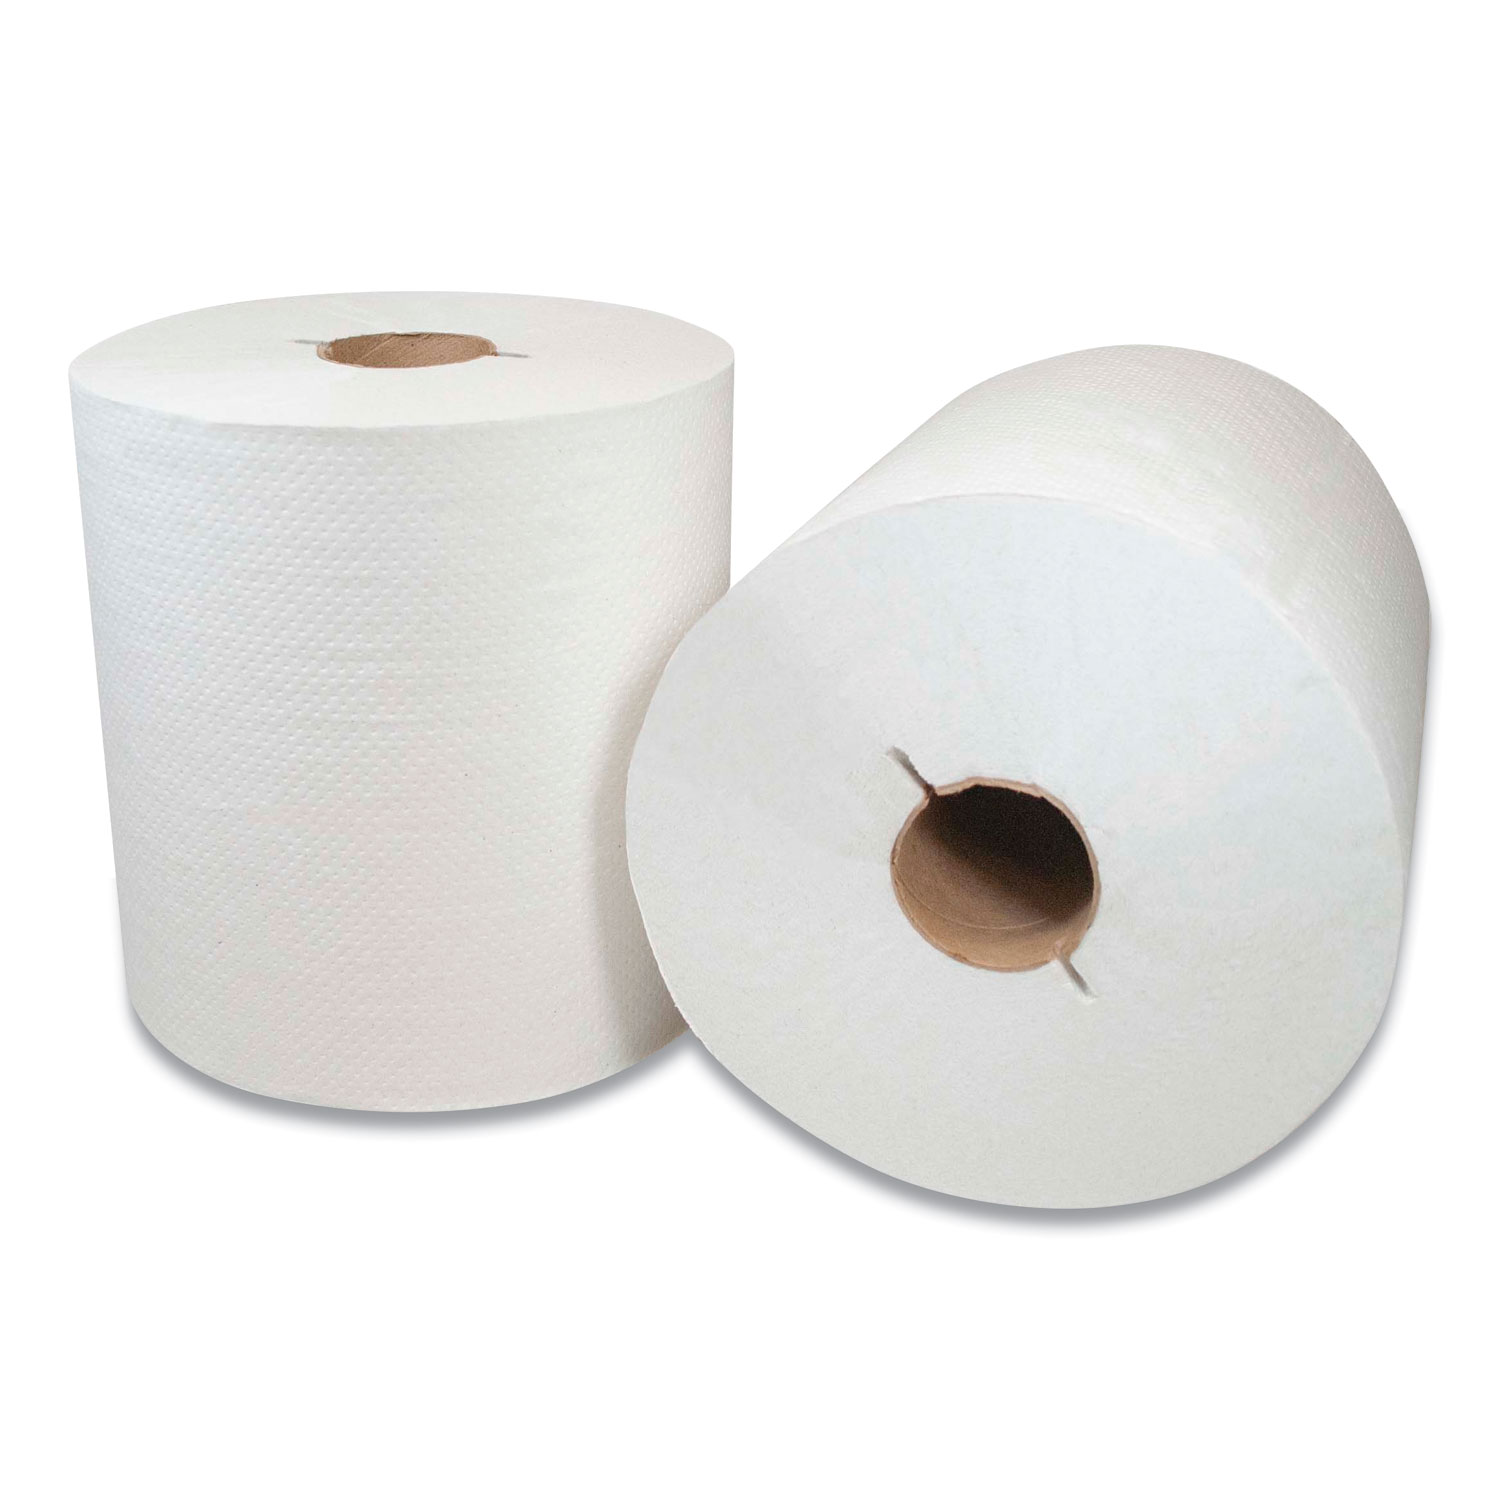  Morcon Tissue 300WI Morsoft Controlled Towels, I-Notch, 7.5 x 800 ft, White, 6/Carton (MOR300WI) 